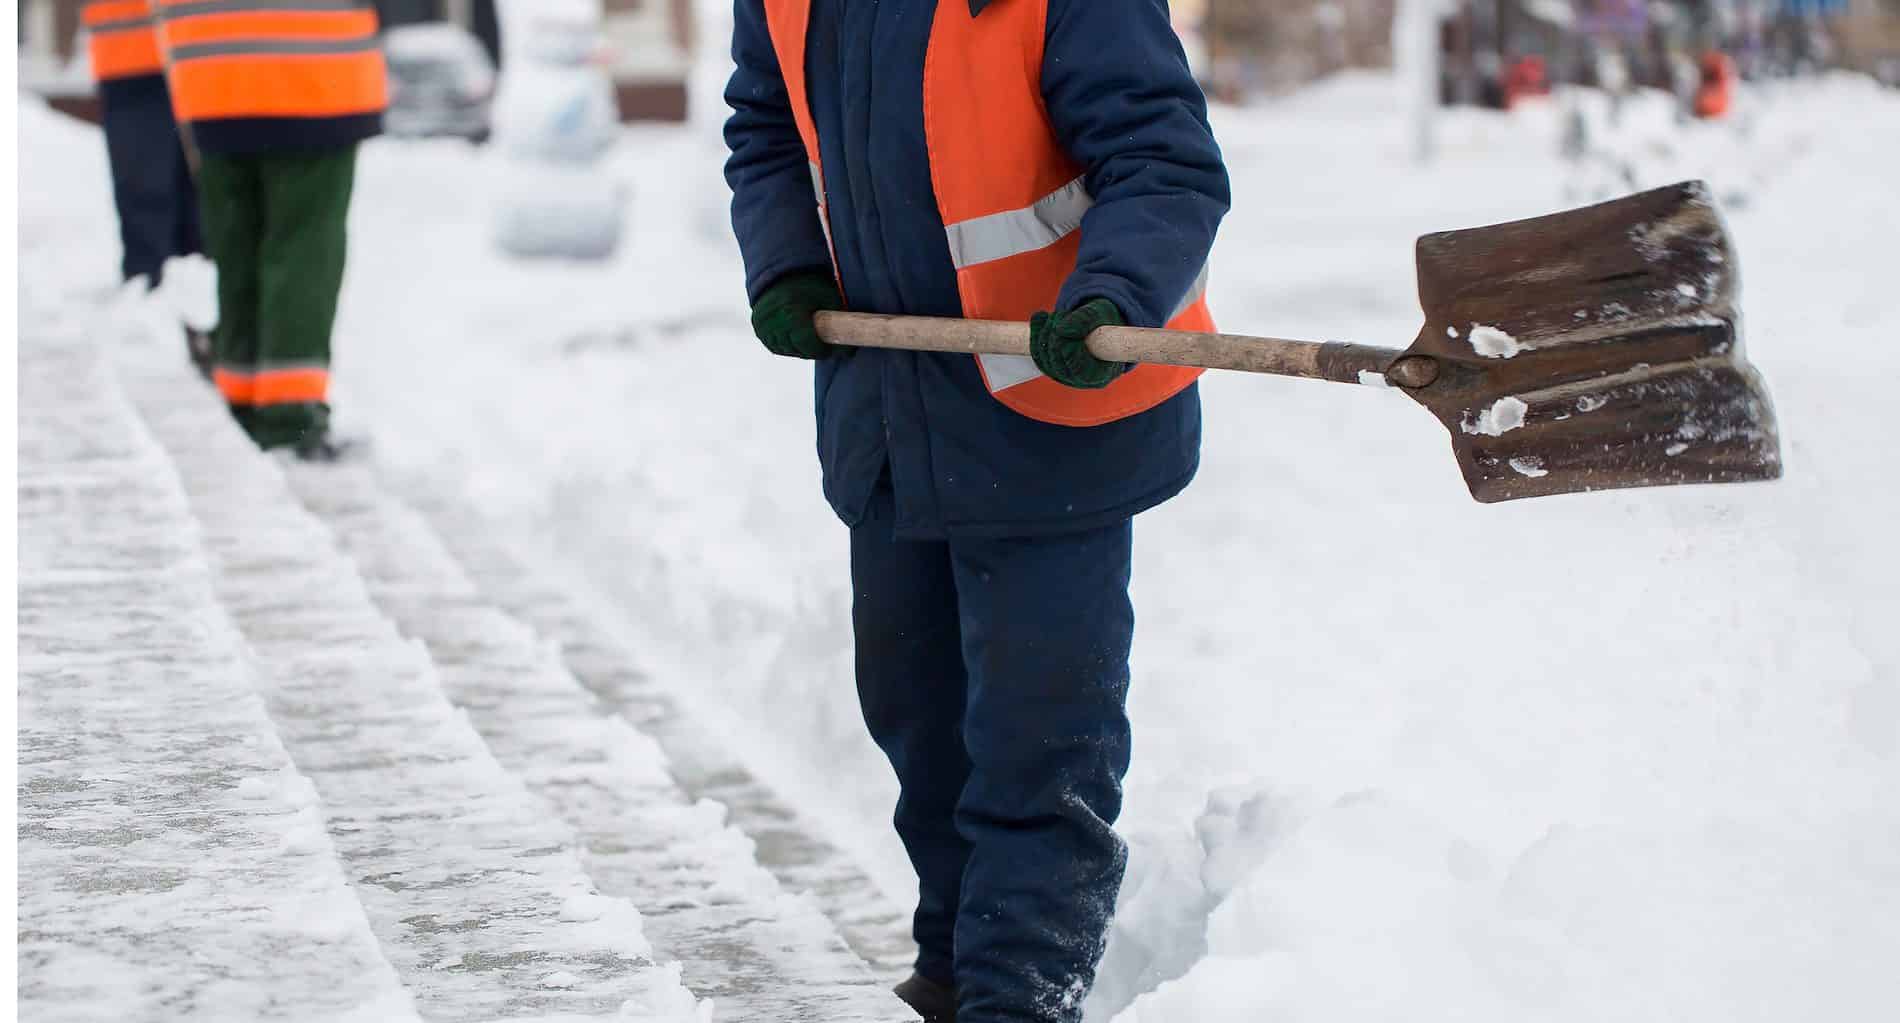 Wellesley Township to revisit sidewalk snow-clearing issue